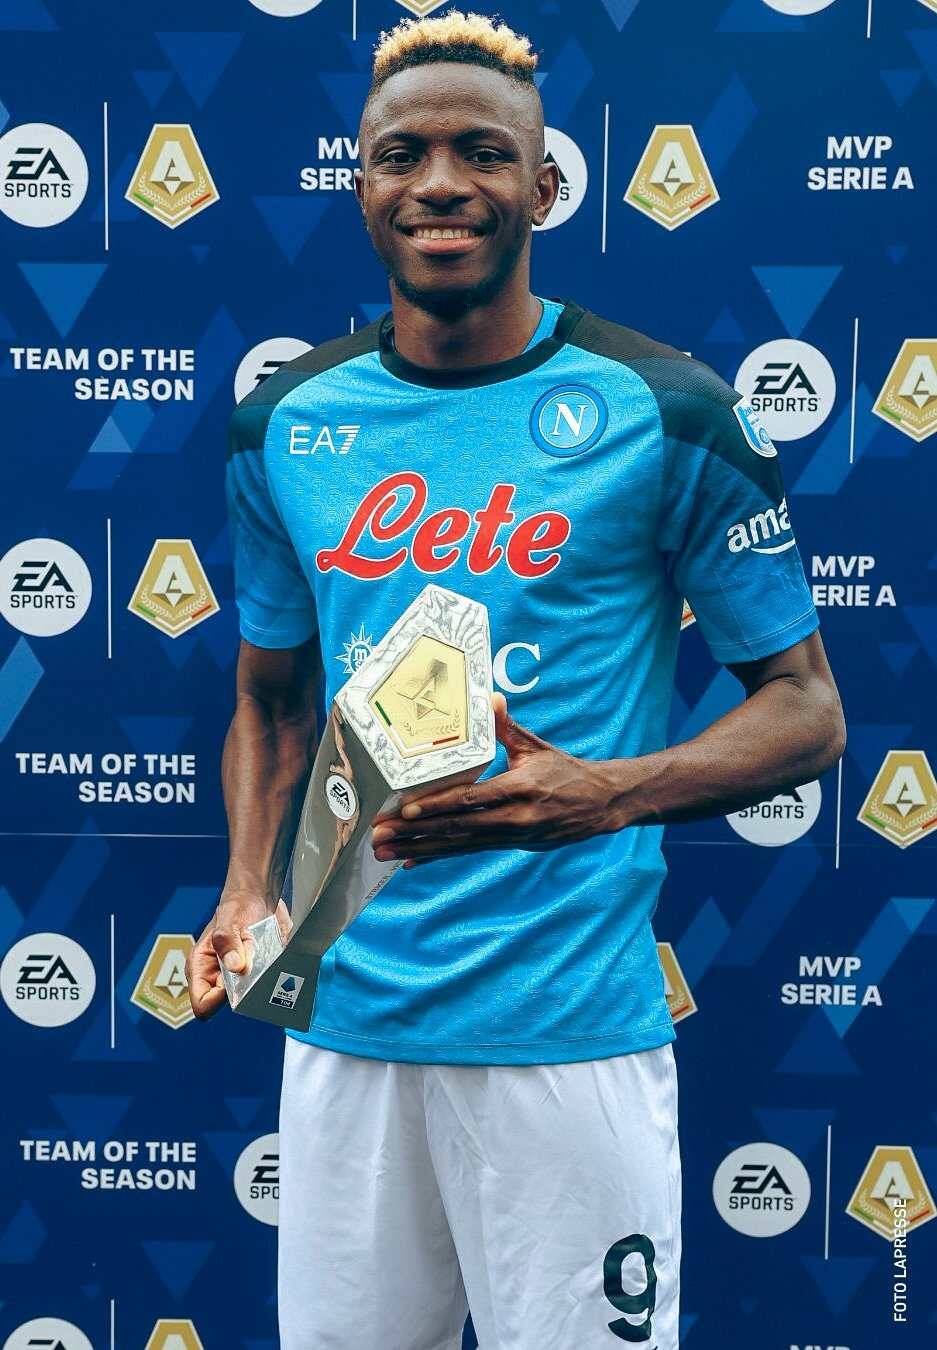 Osimhen becomes first African player to win golden boot in Serie A in 125 years